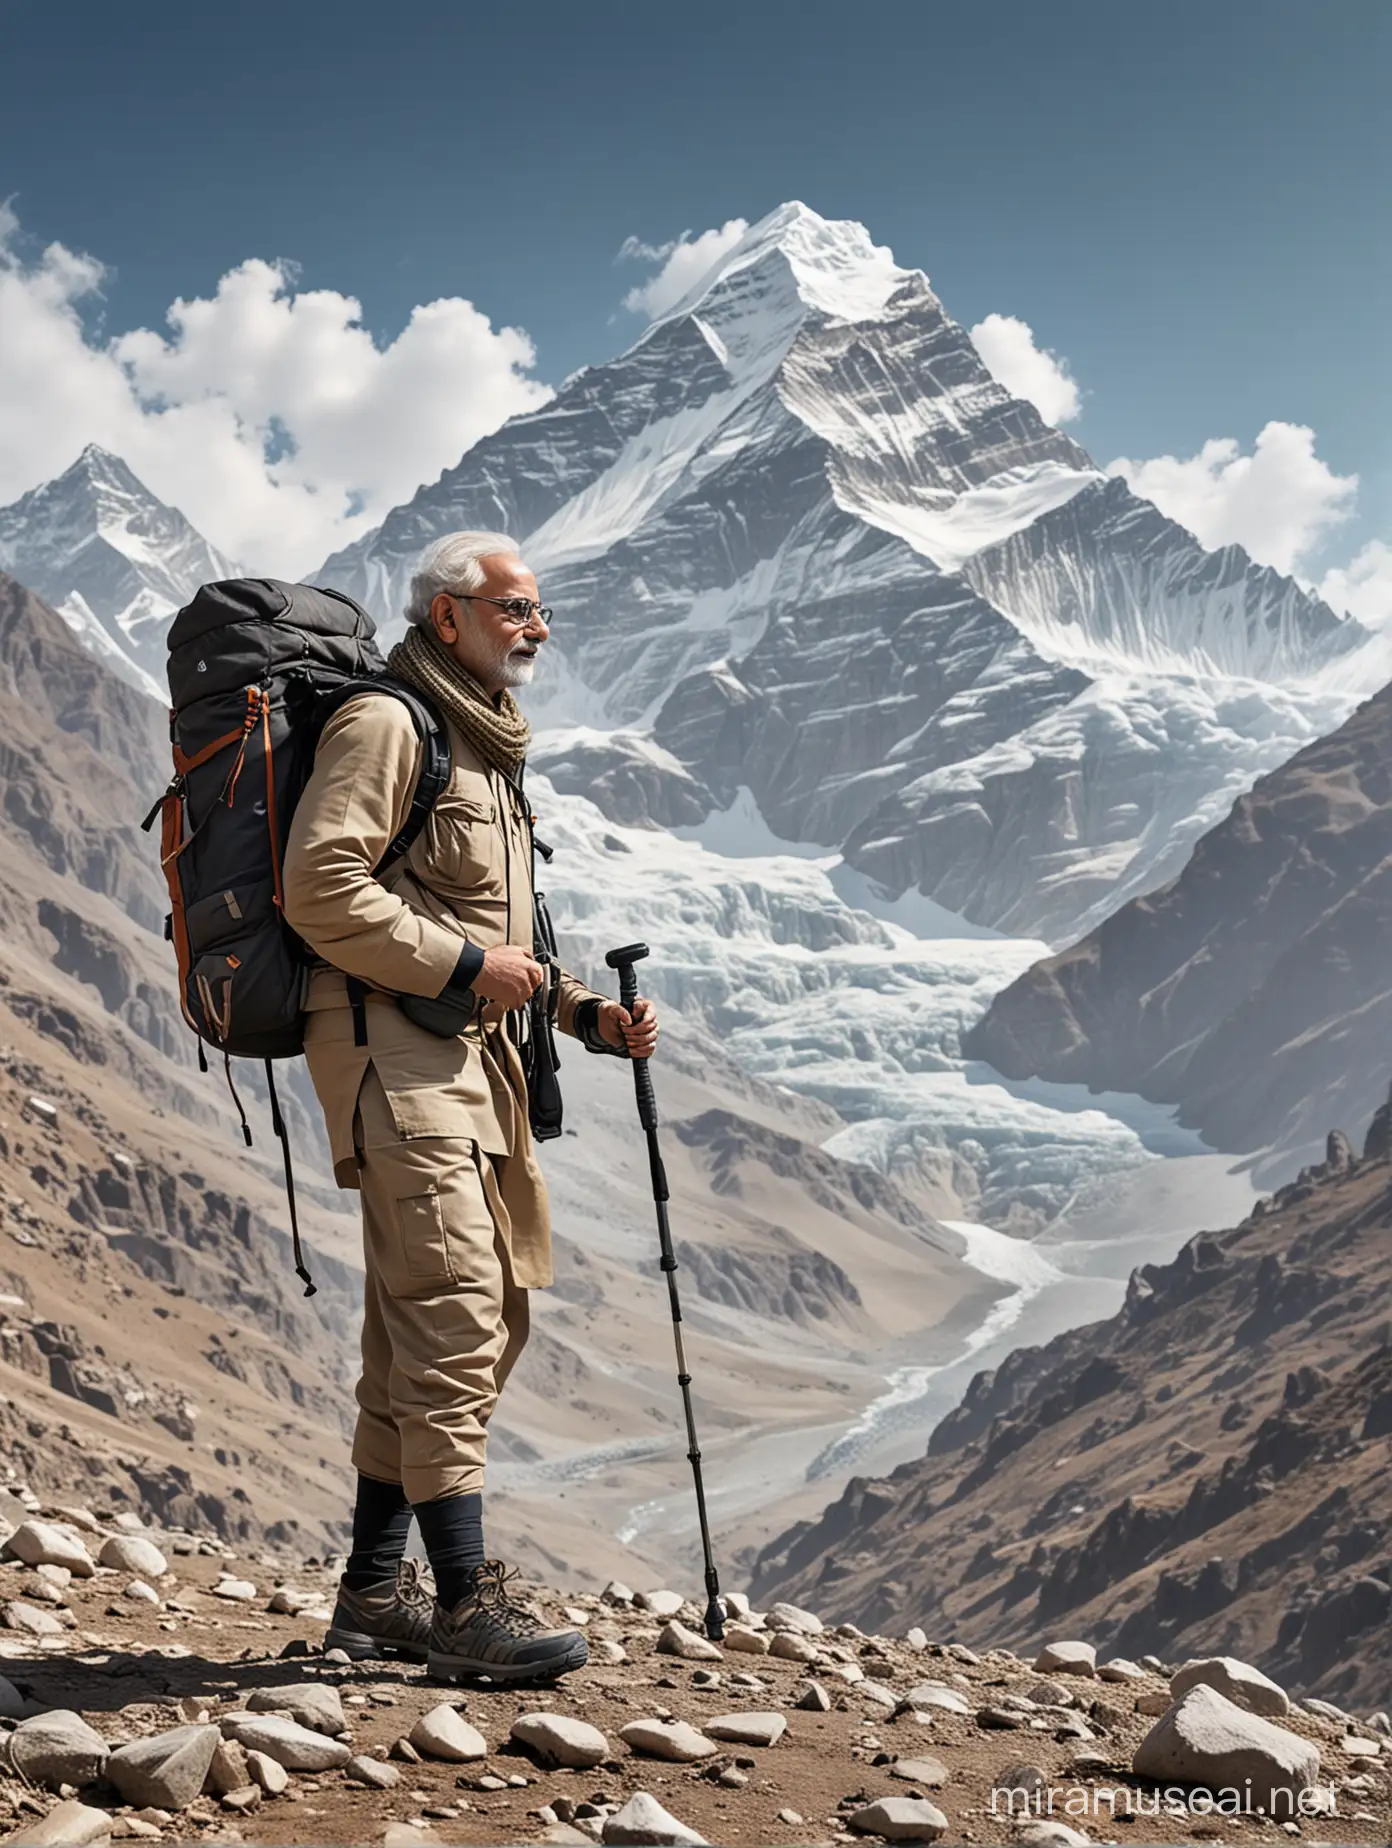 Create a realistic AI image of the Indian Prime Minister going for trekking in the Himalayas. Show the Prime Minister dressed in trekking attire, wearing a backpack and carrying a trekking pole. Include a water bottle hanging from the backpack, indicating preparedness for the trek. Capture the majestic Himalayan landscape in the background, emphasizing the Prime Minister's adventurous spirit and love for nature